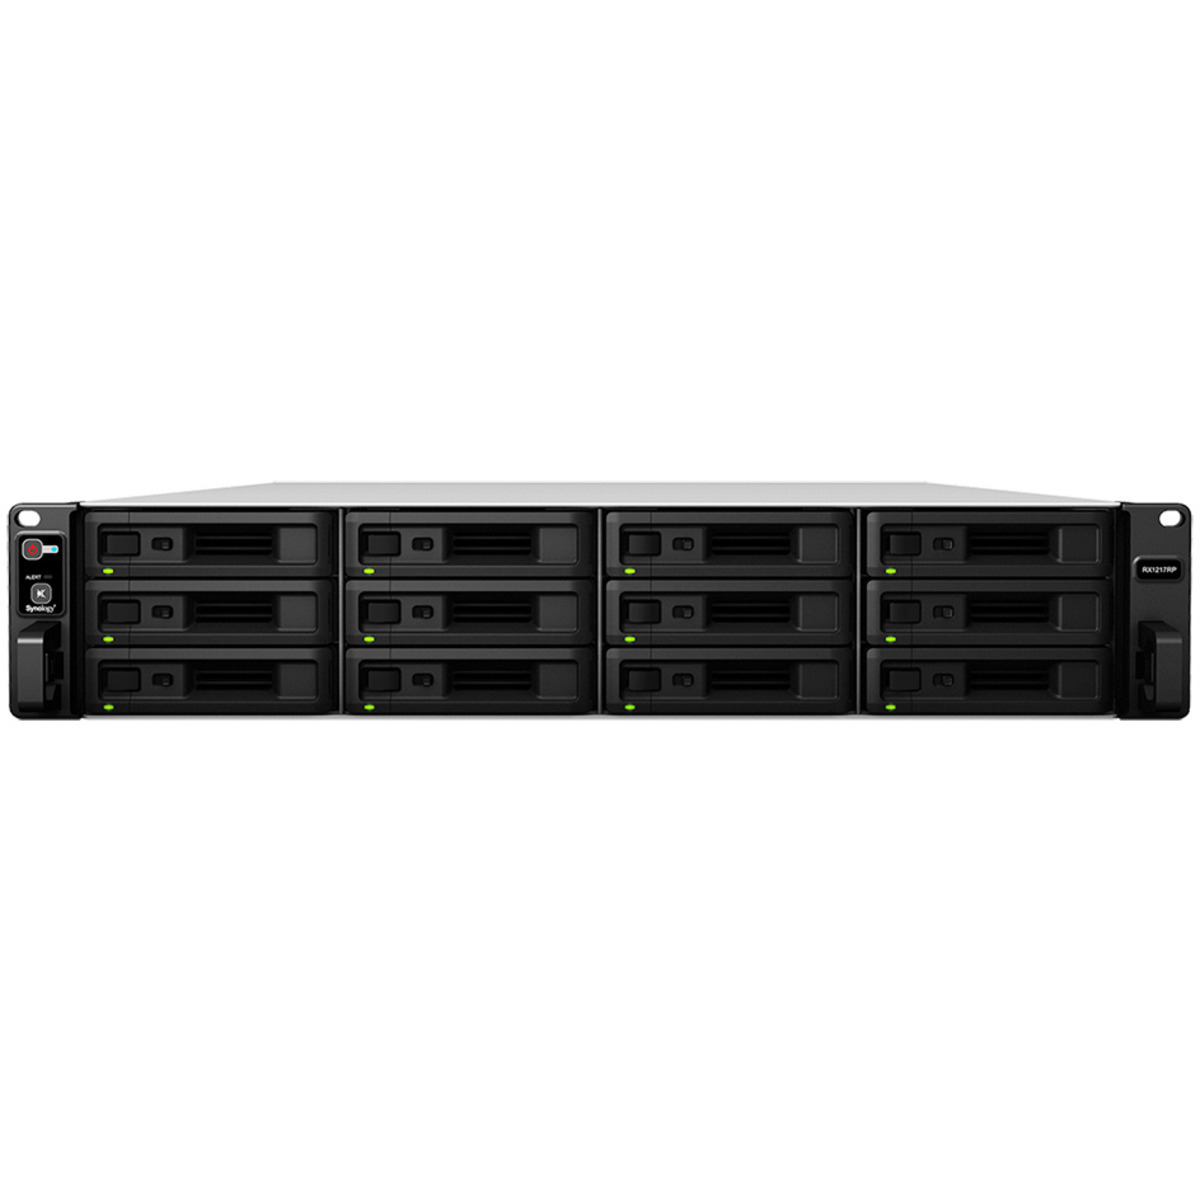 buy $5554 Synology RX1217RP 96tb RackMount Expansion Enclosure 12x8000gb Seagate EXOS ST8000NM000A 3.5 7200rpm SATA 6Gb/s HDD ENTERPRISE Class Drives Installed - Burn-In Tested - nas headquarters buy network attached storage server device das new raid-5 free shipping usa christmas new year holiday sale RX1217RP